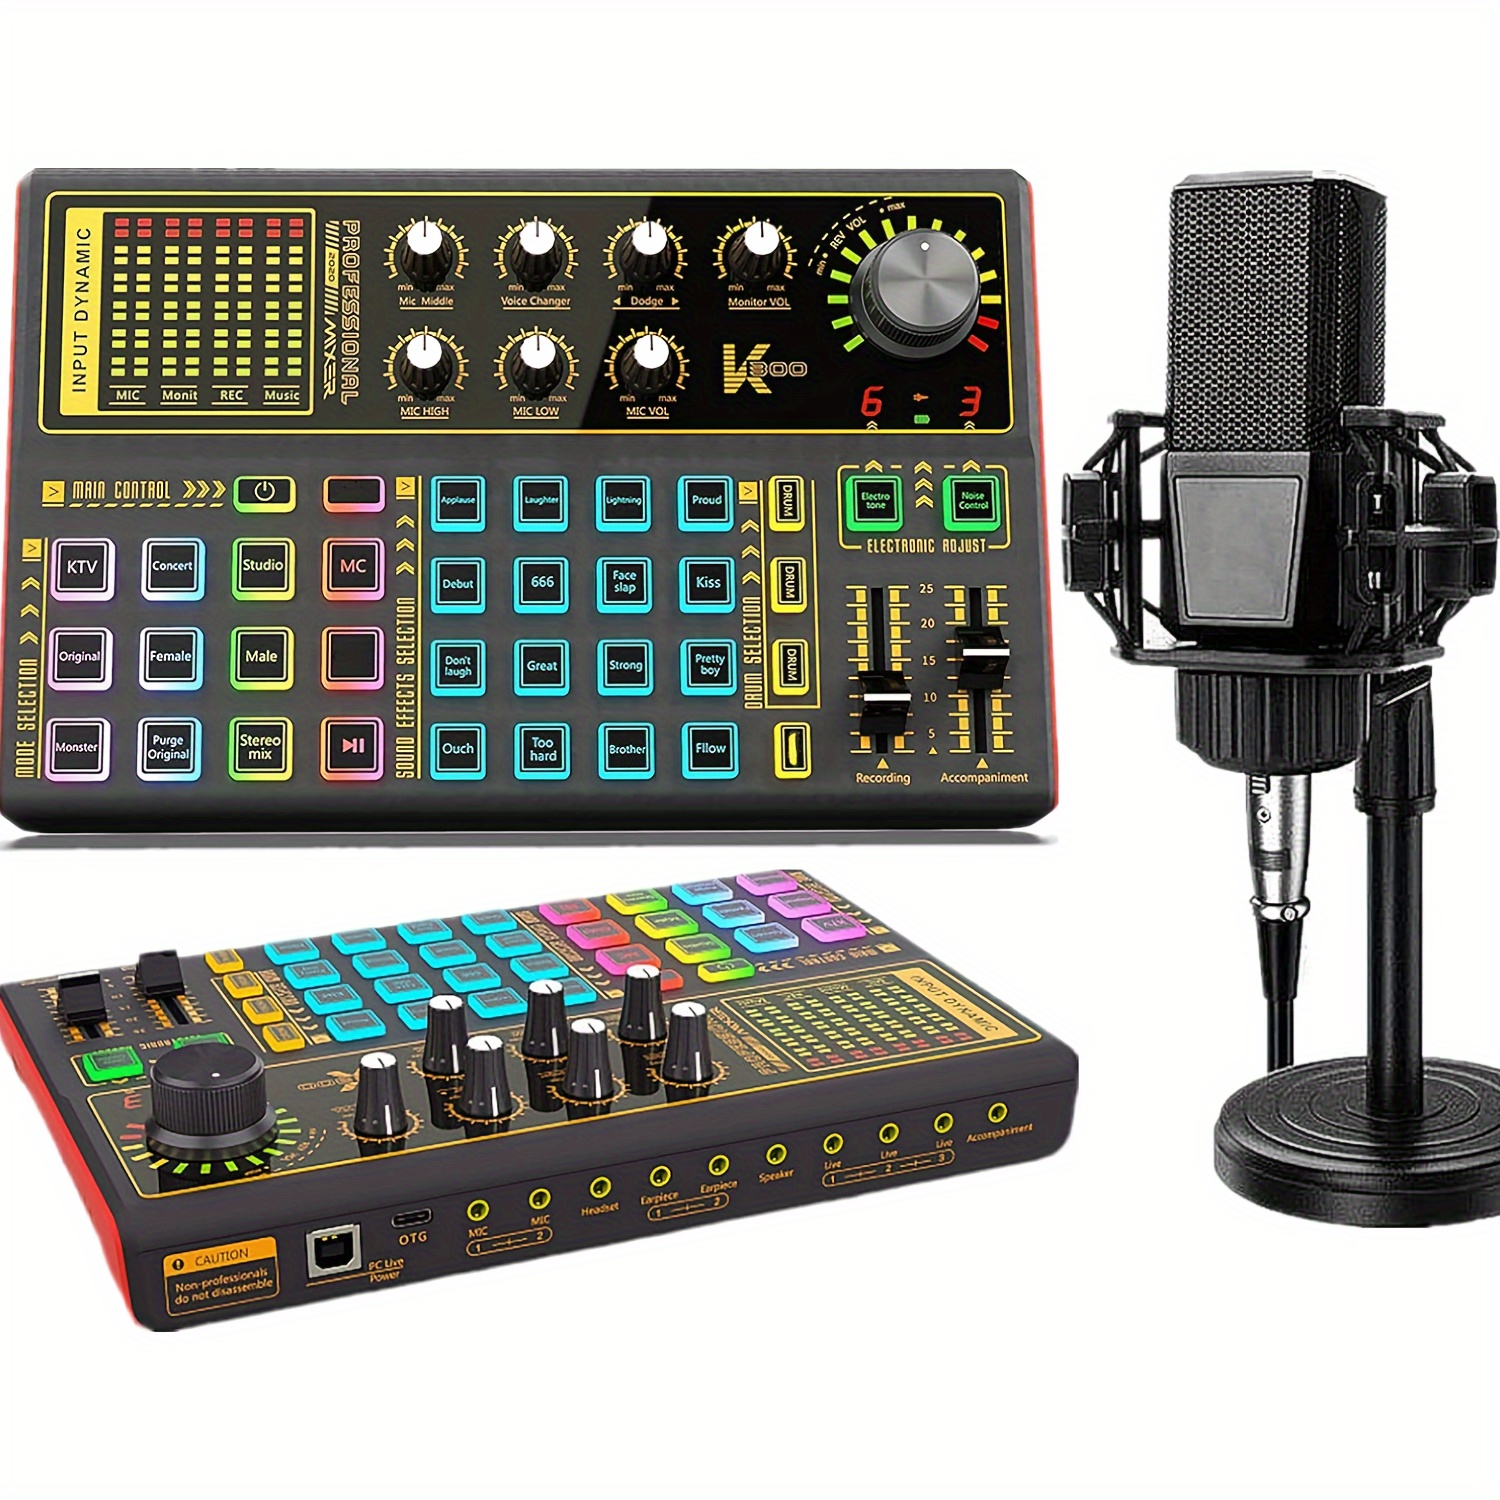 

Podcast Equipment Bundle, Live Sound Card With Podcast Microphone, Audio Interface For Music Recording Karaoke Singing